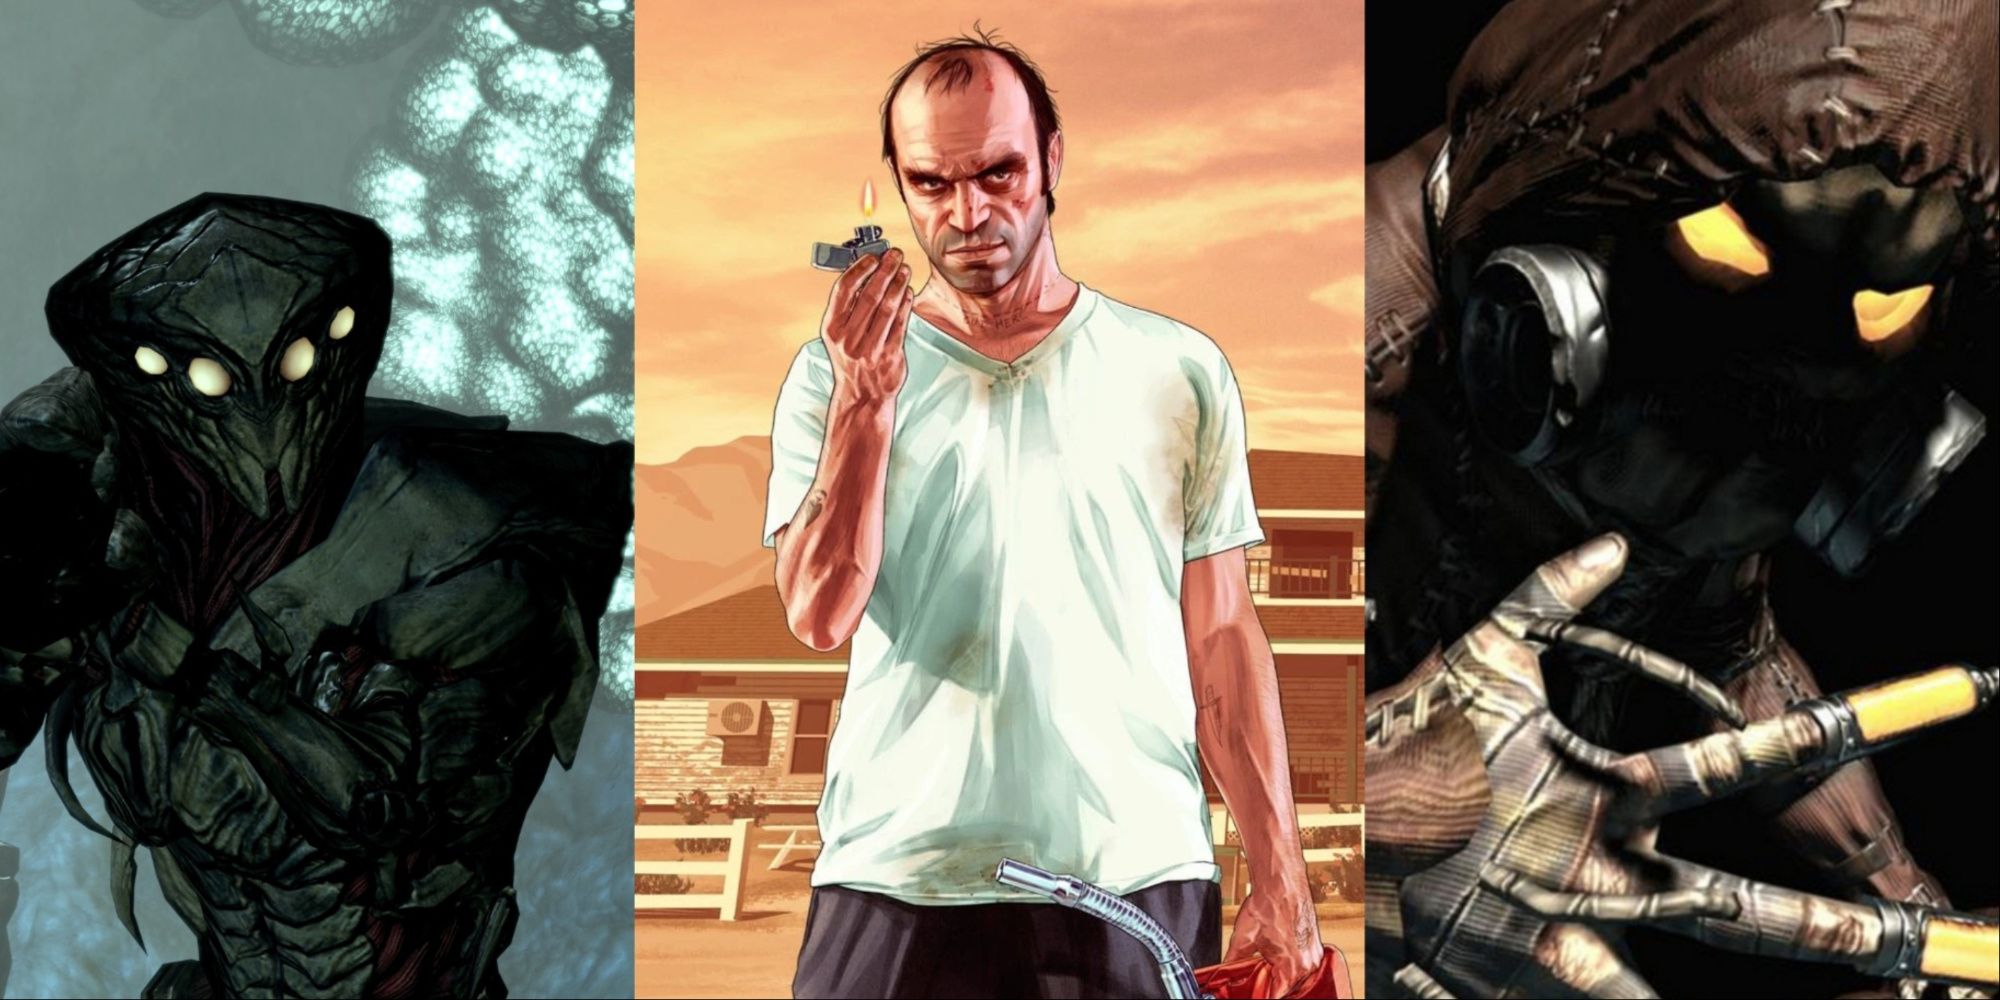 A collage showing The Collectors from Mass Effect 2, Trevor from GTA 5, and Scarecrow from Batman Arkham Asylum.